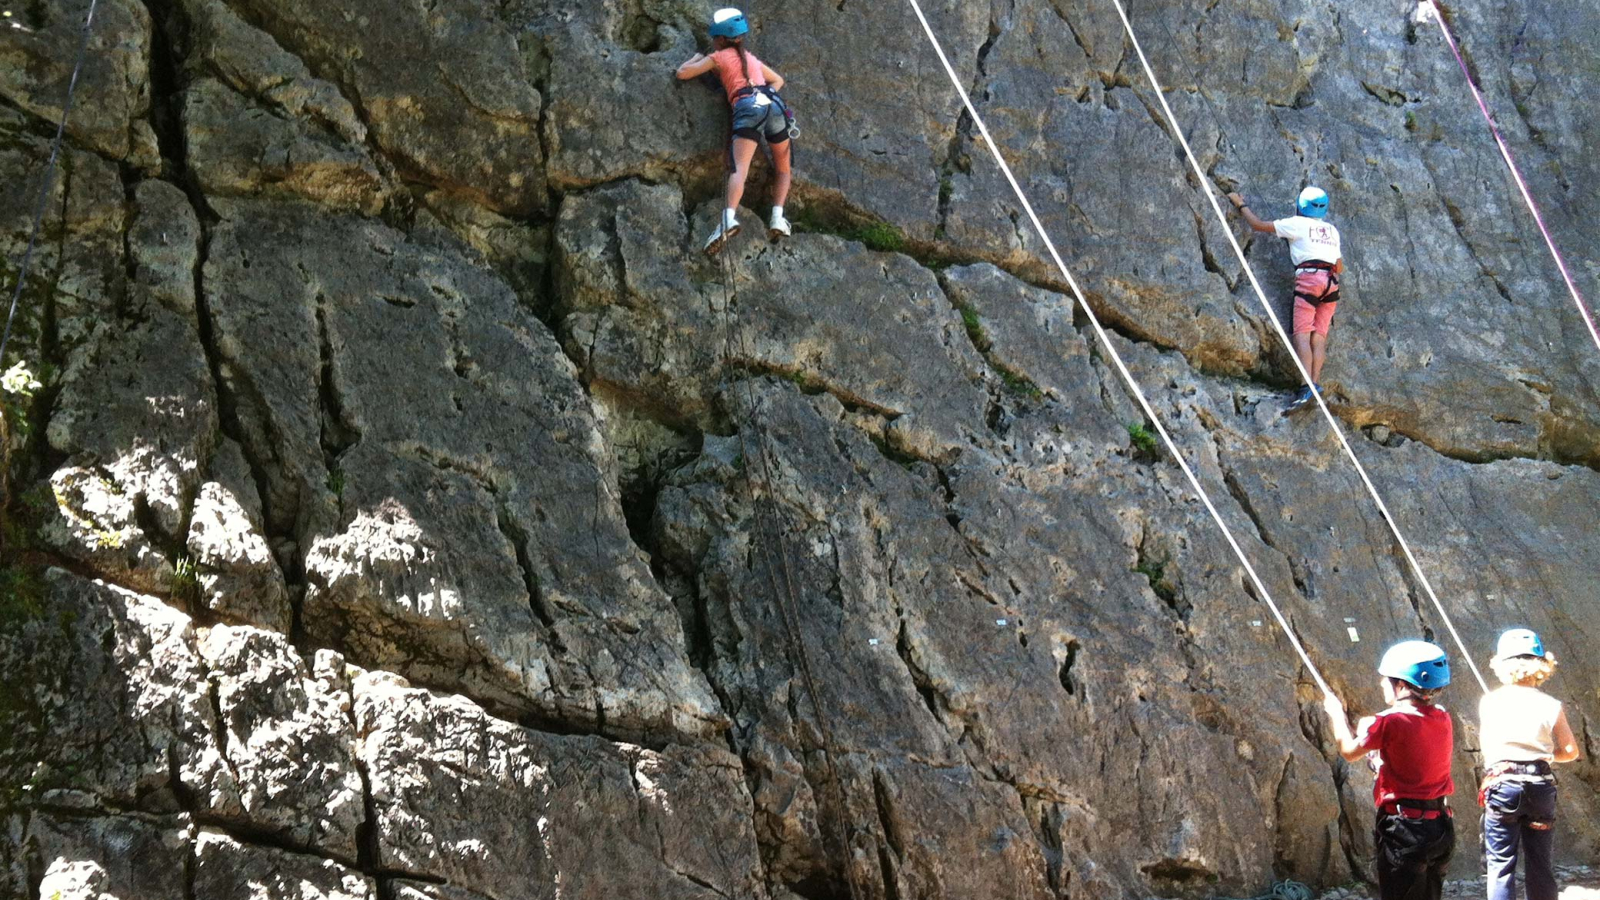 Beginners in climbing course